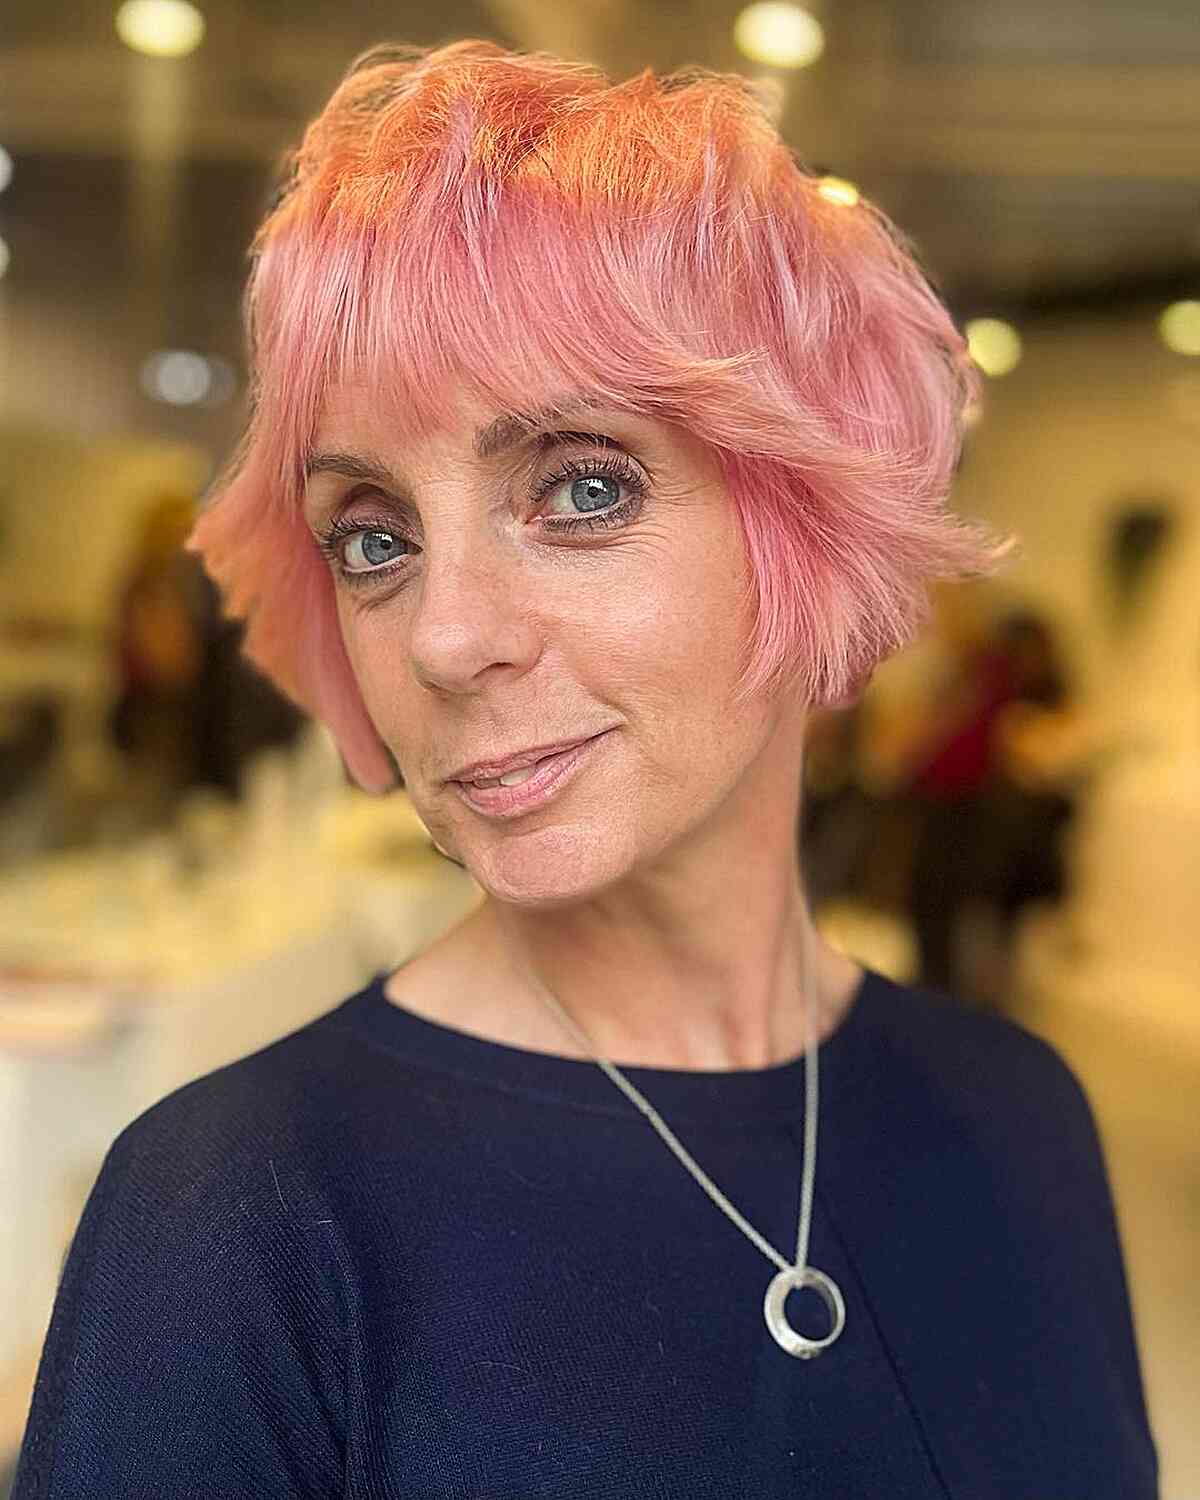 Jaw-Length Shaggy Pink Bob with Eye-Grazing Fringe for women in their 50s